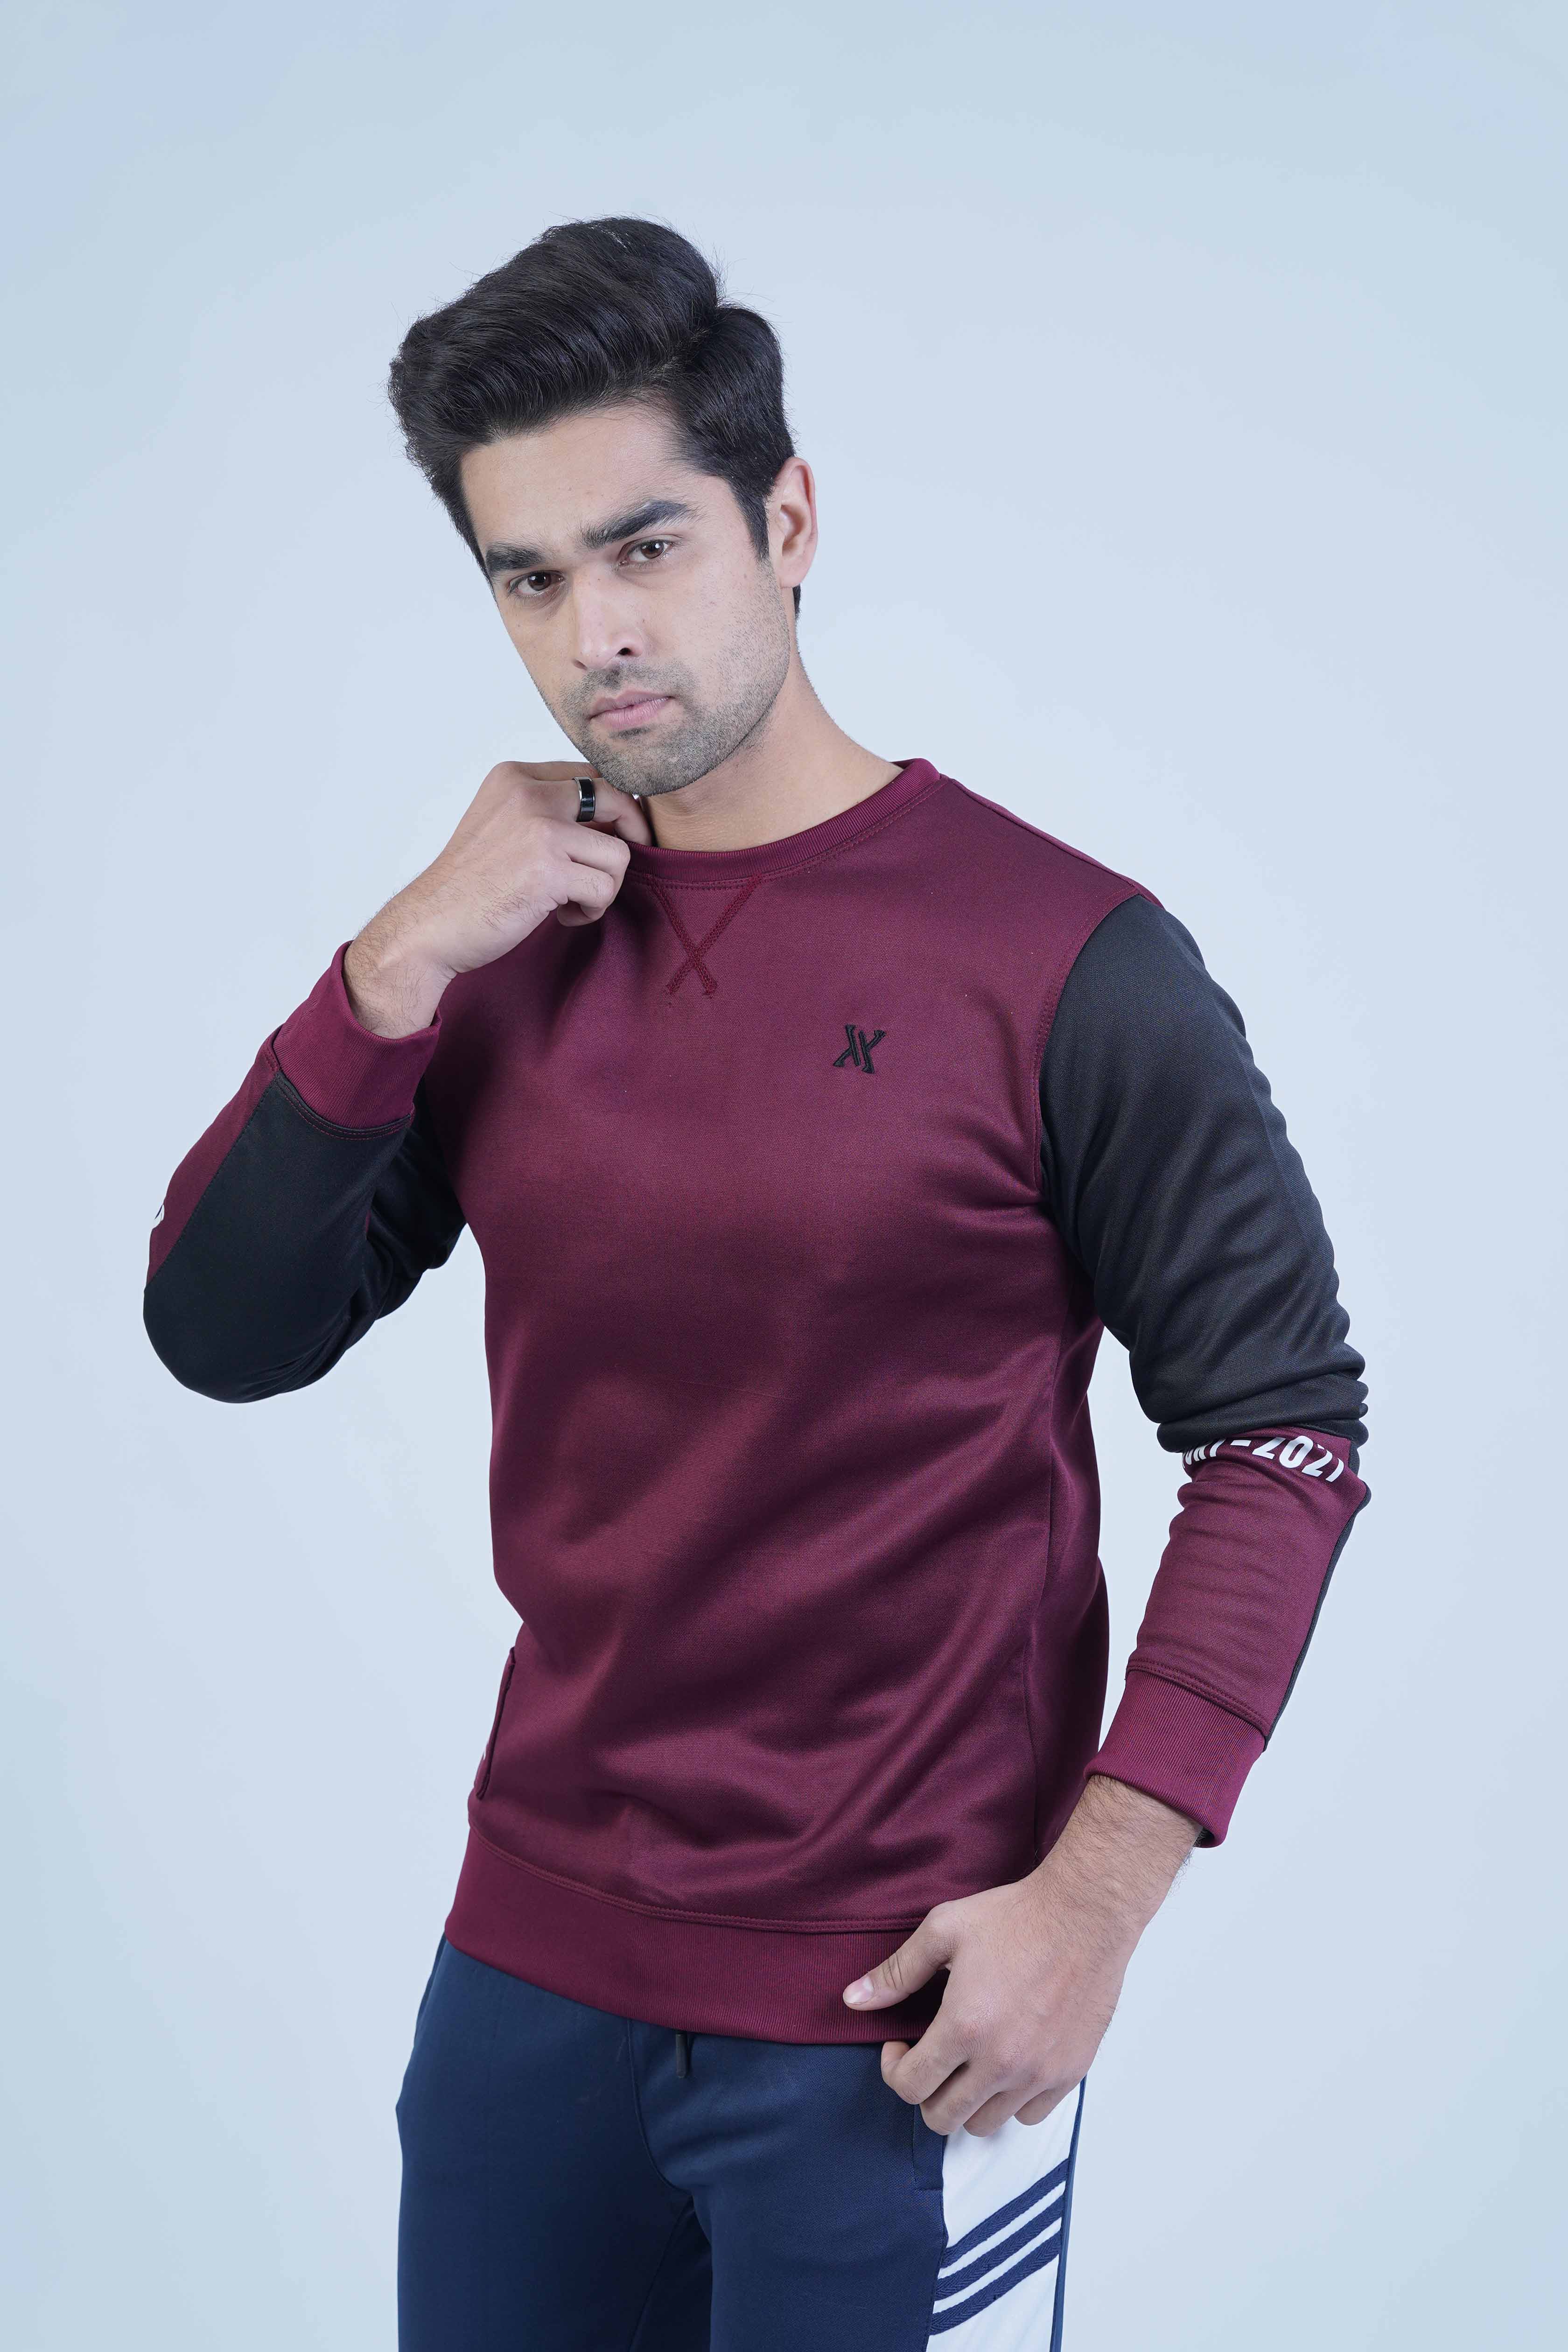  Premium Quality: Sporty Quilt Maroon Sweatshirt by The Xea